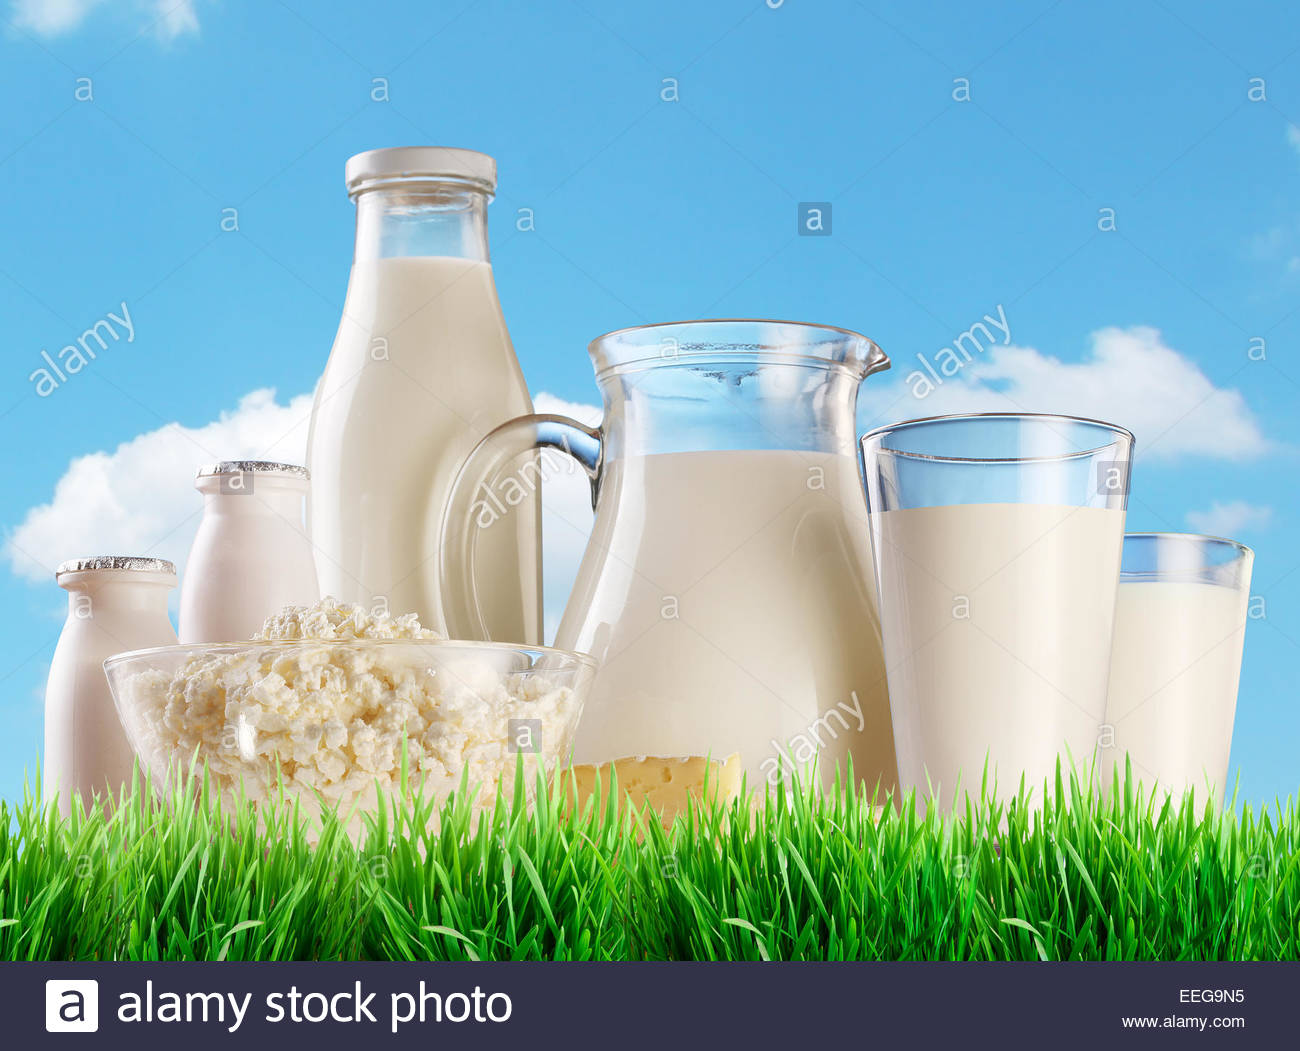 Free download Some Dairy Products Shot On Reflective White Background ...